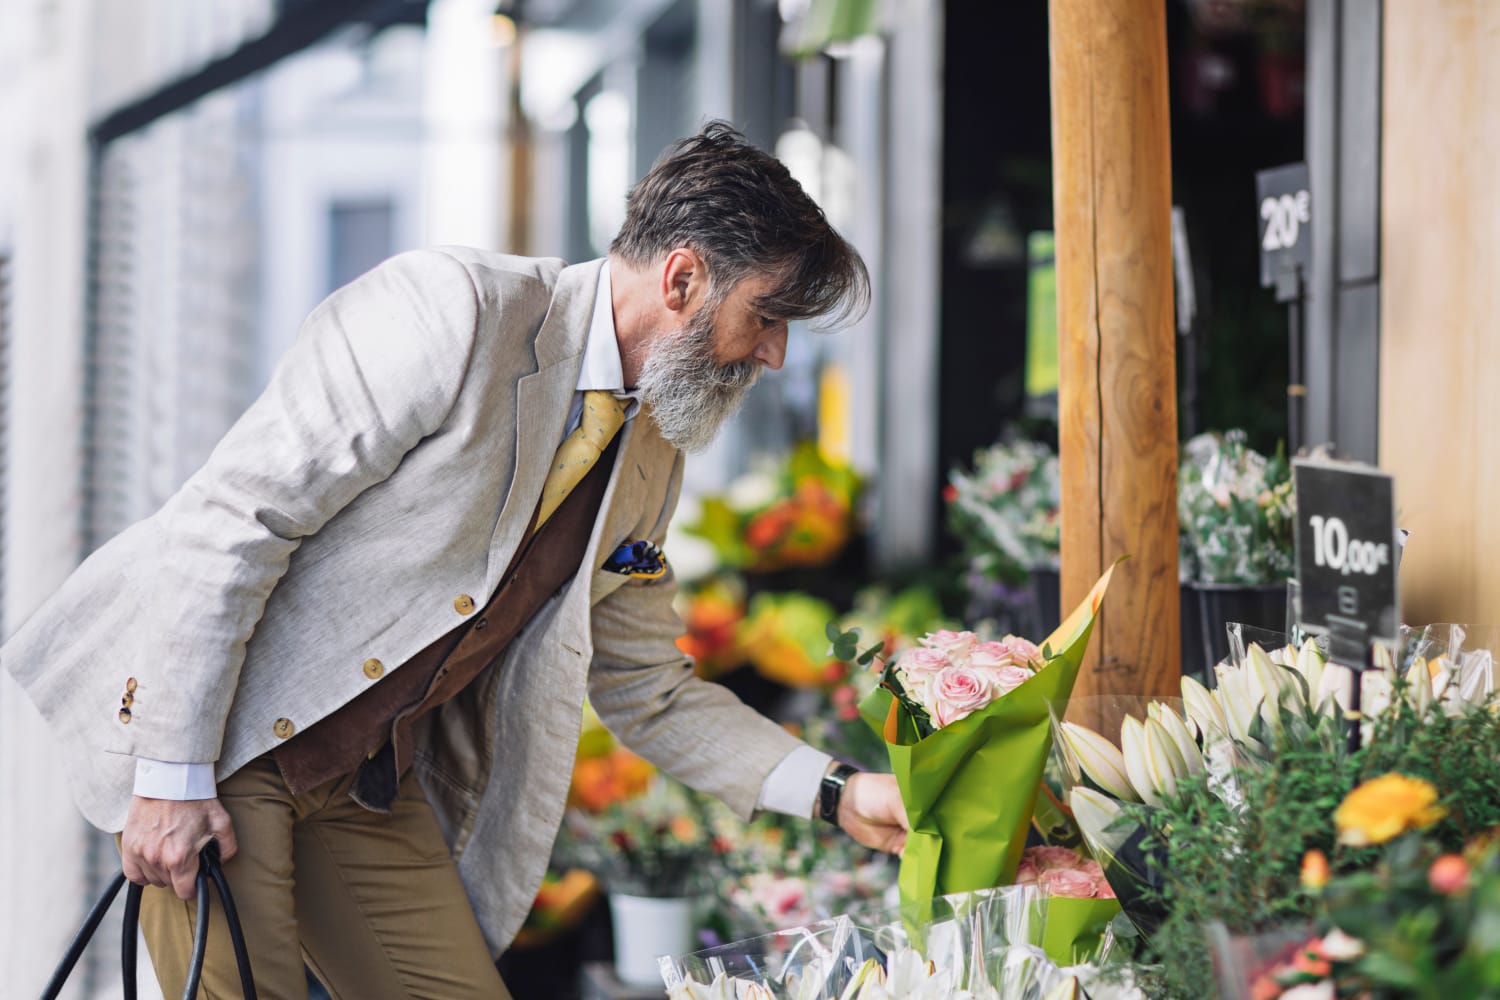 Man in a suit shopping for flowers near Elevation Townhomes in Phoenix, Arizona